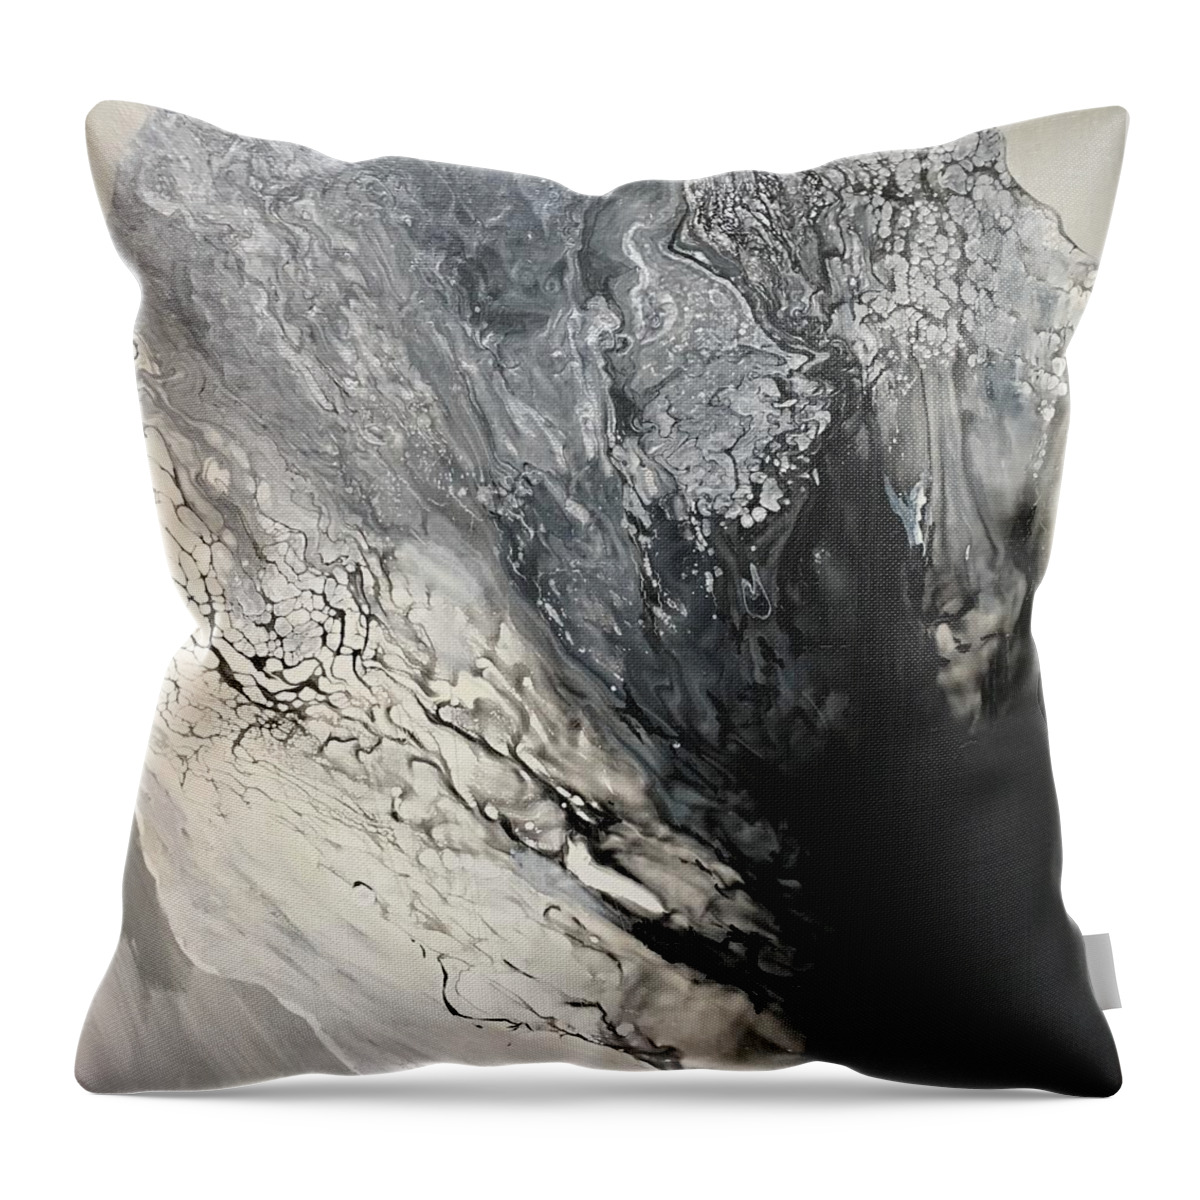 Abstract Throw Pillow featuring the painting Grazie by Soraya Silvestri